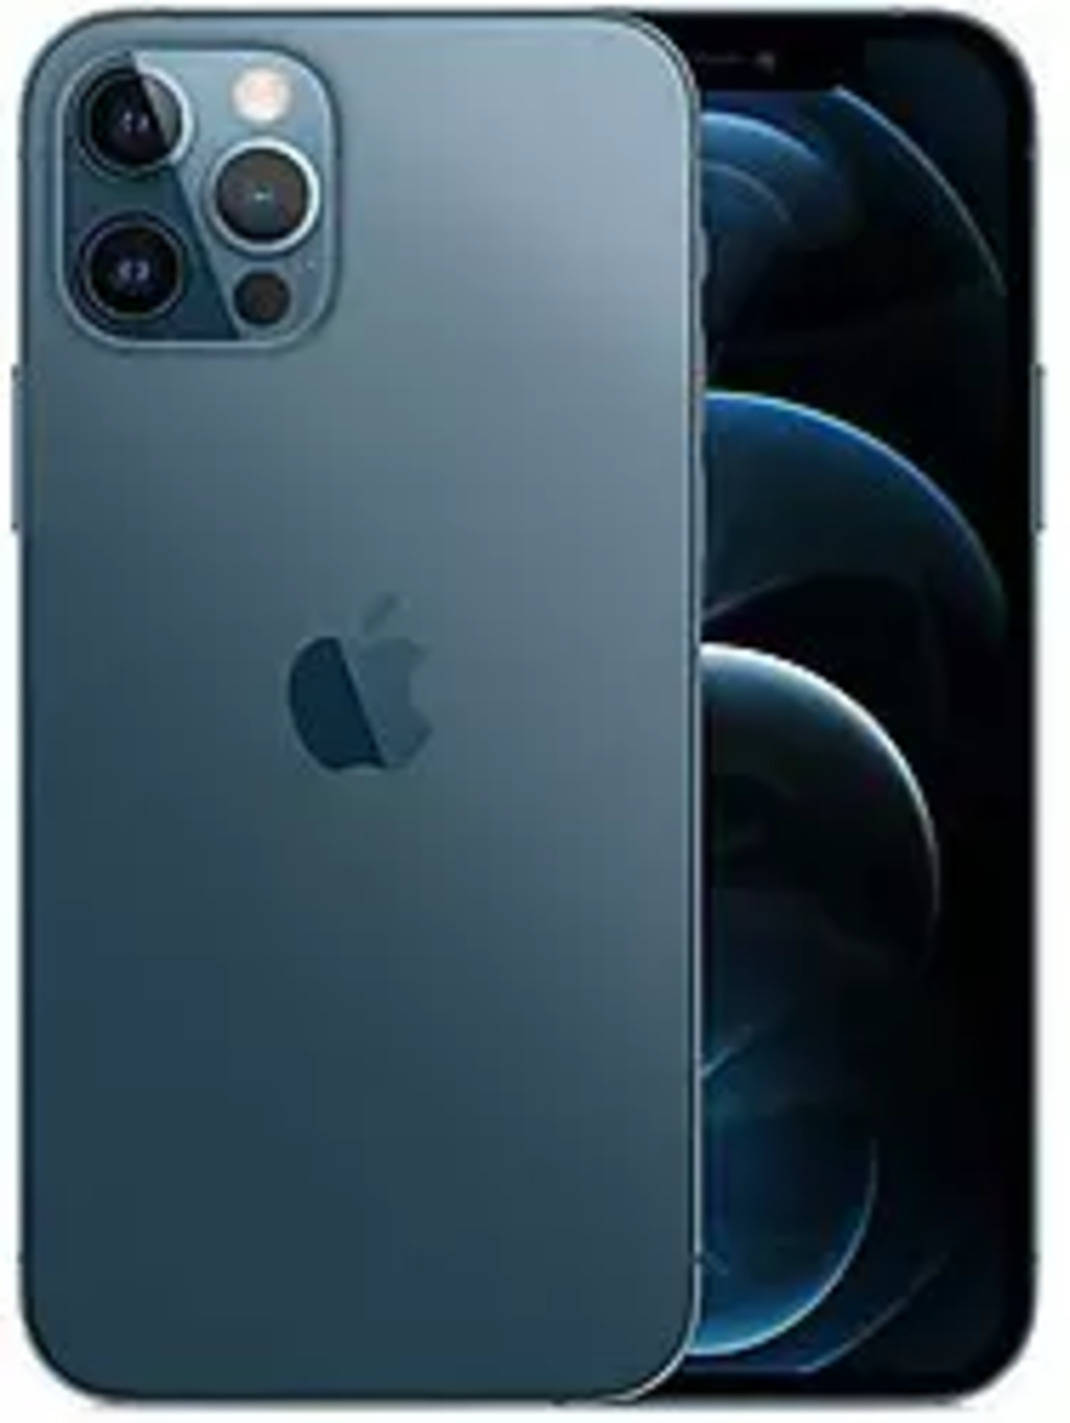 Compare Apple Iphone 12 Pro Vs Apple Iphone Xr Price Specs Review Gadgets Now